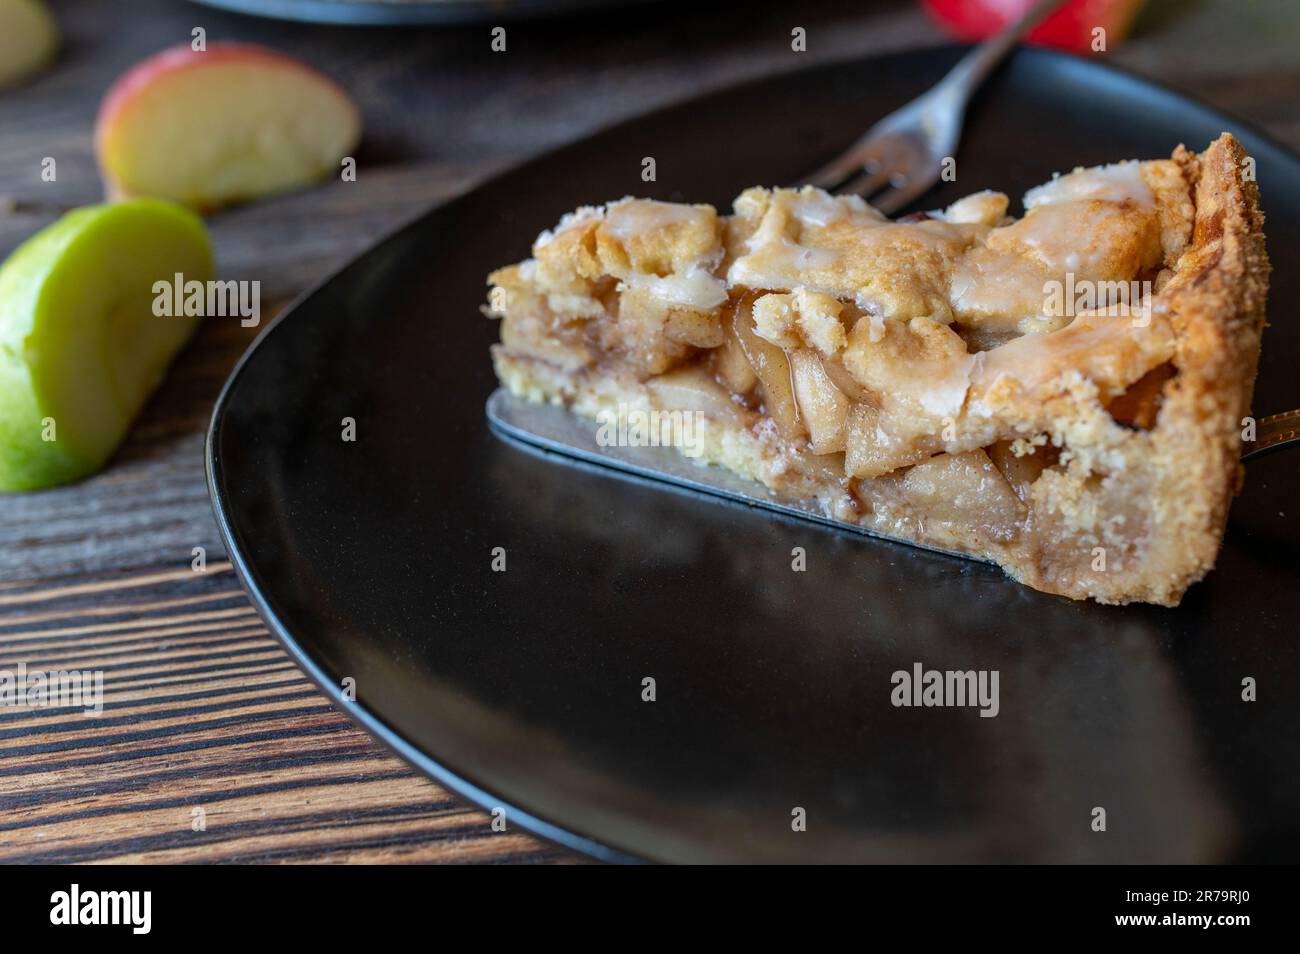 Piece of apple pie on a plate Stock Photo